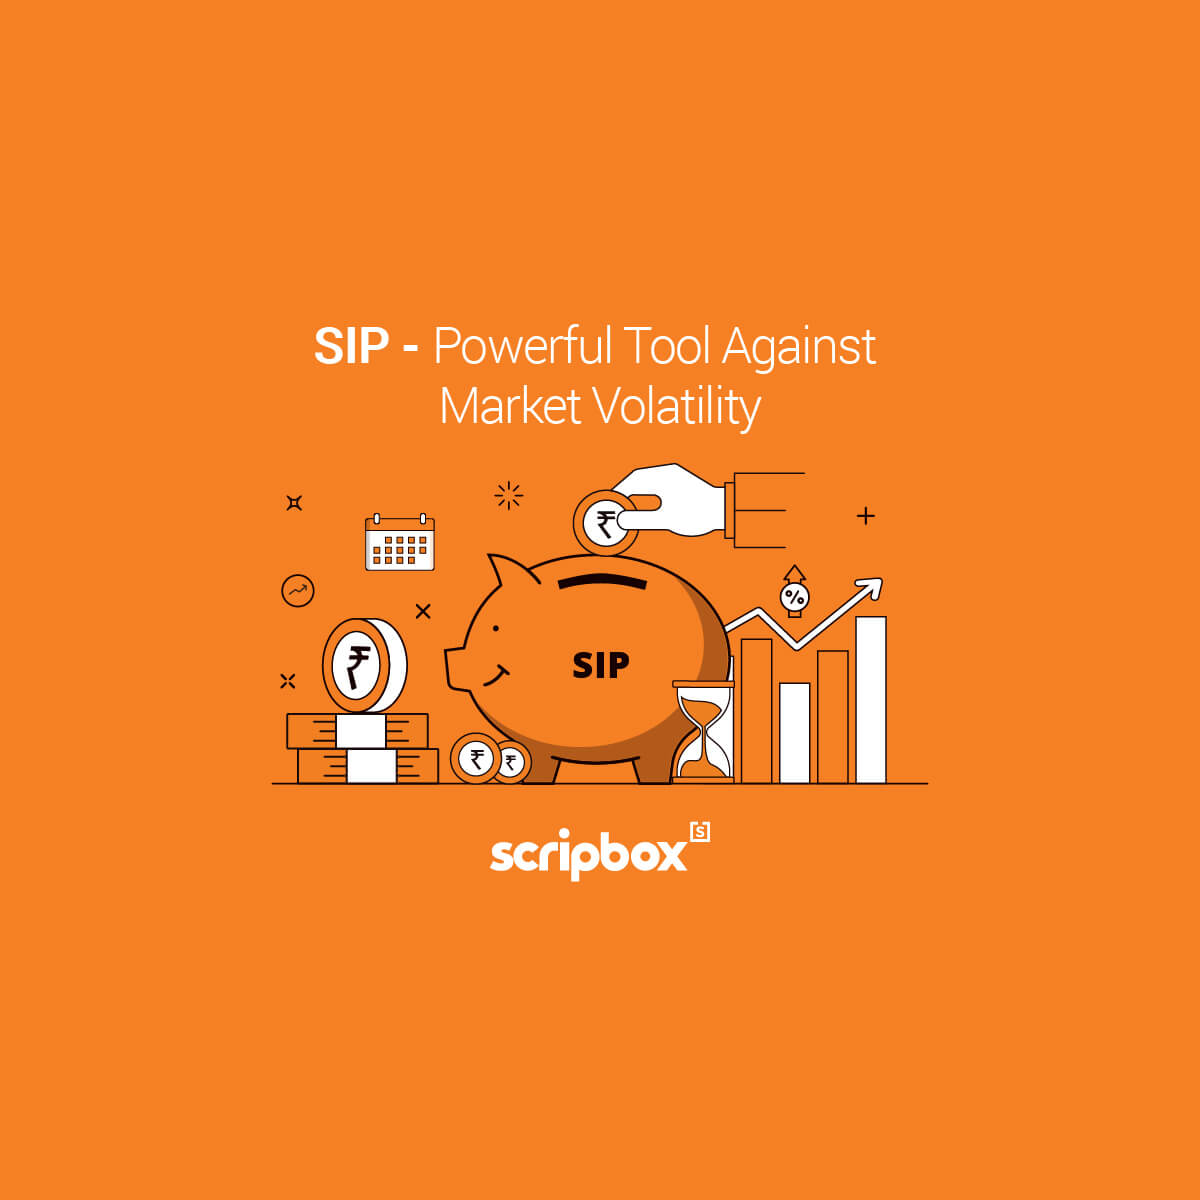 sip powerful tool against market volatility